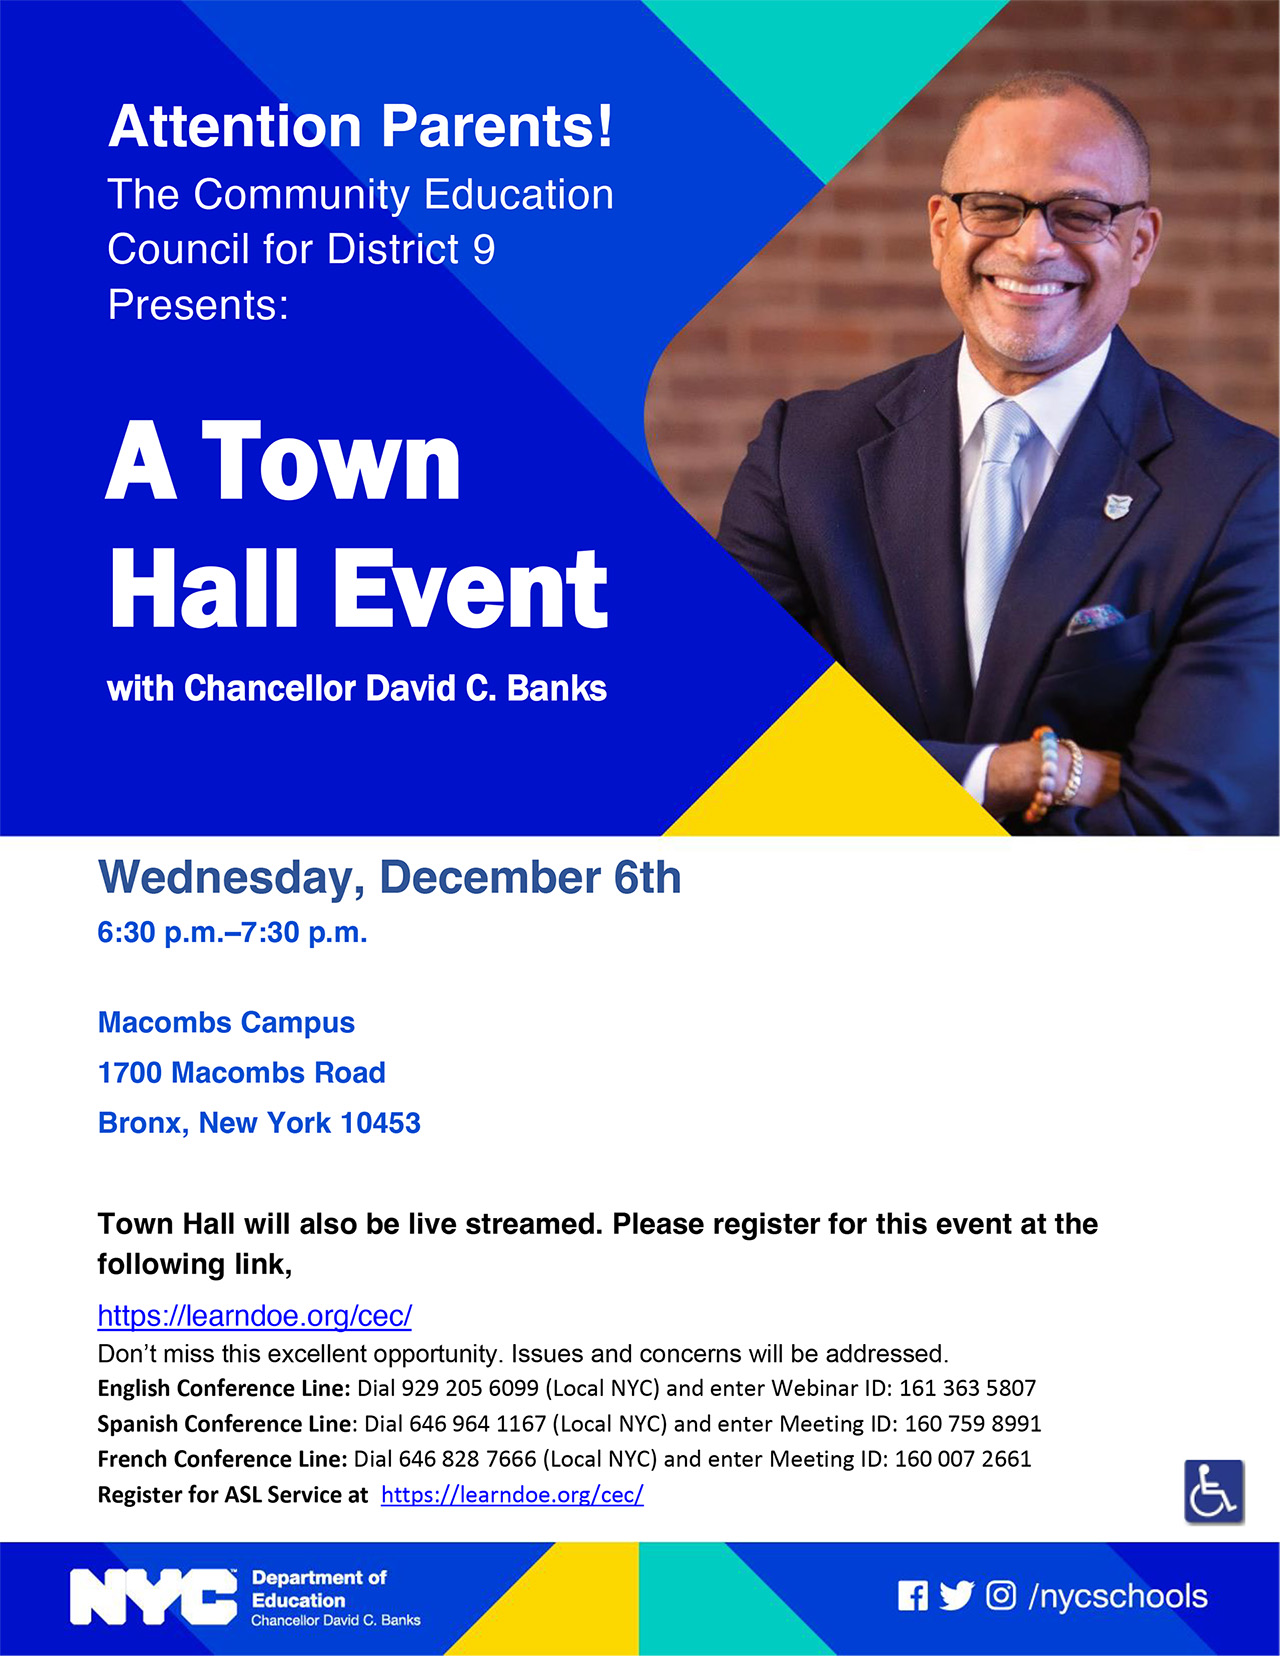 Town Hall Event with David C. Banks